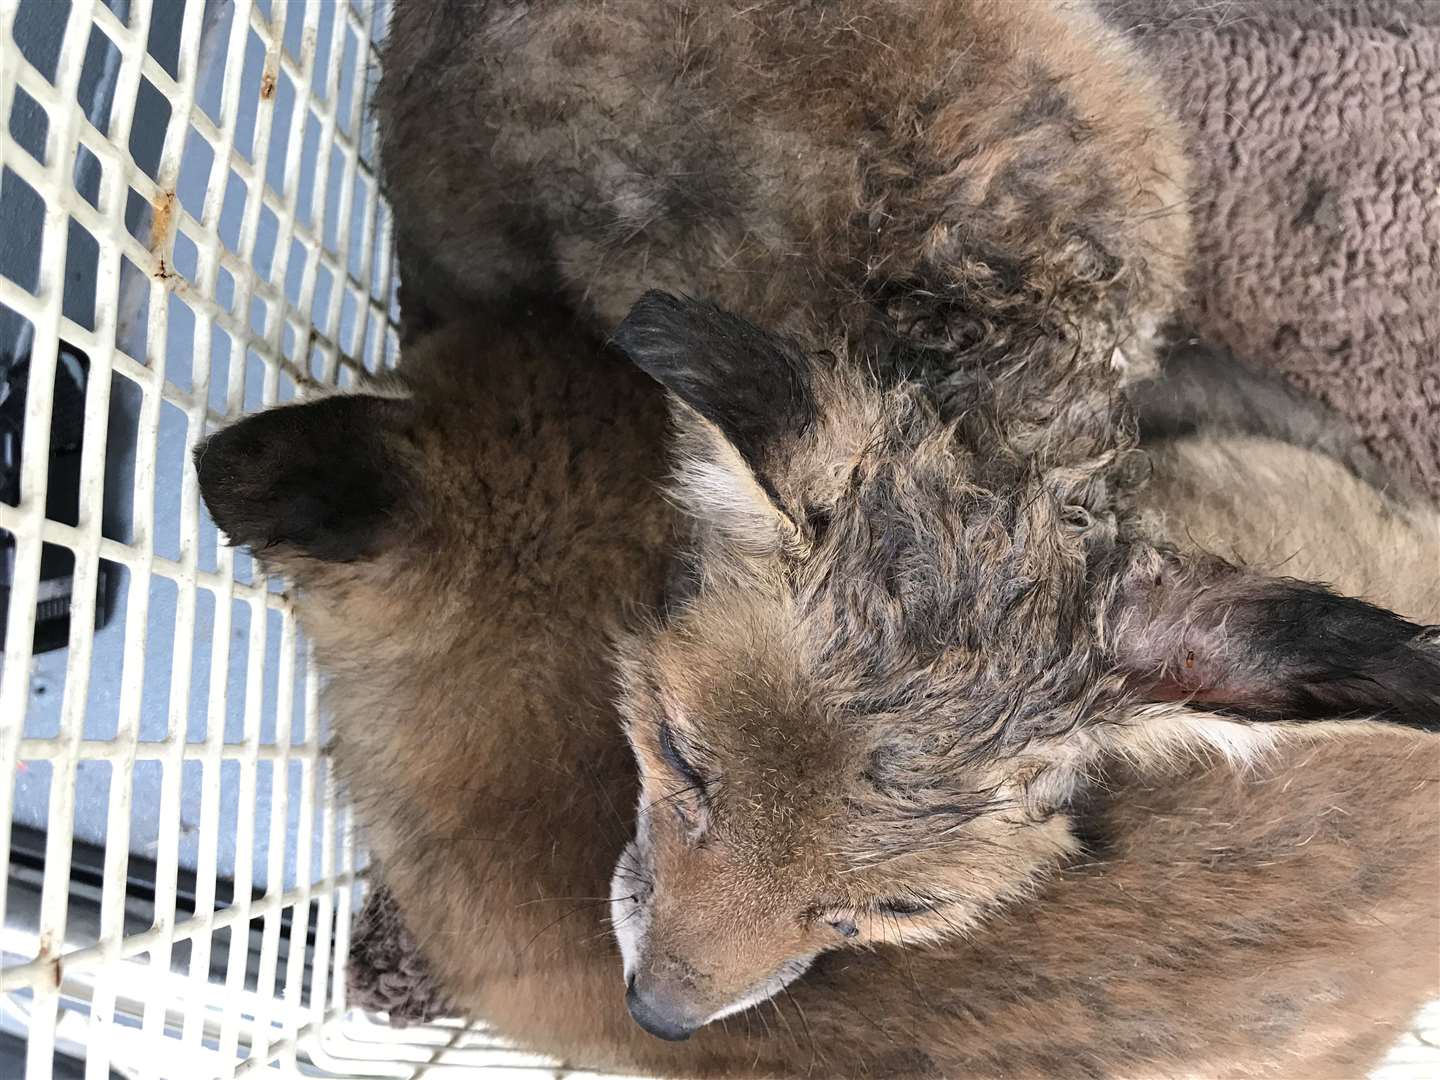 Fox cub and his sister were taken to the South Essex Wildlife Hospital. Images from RSPCA